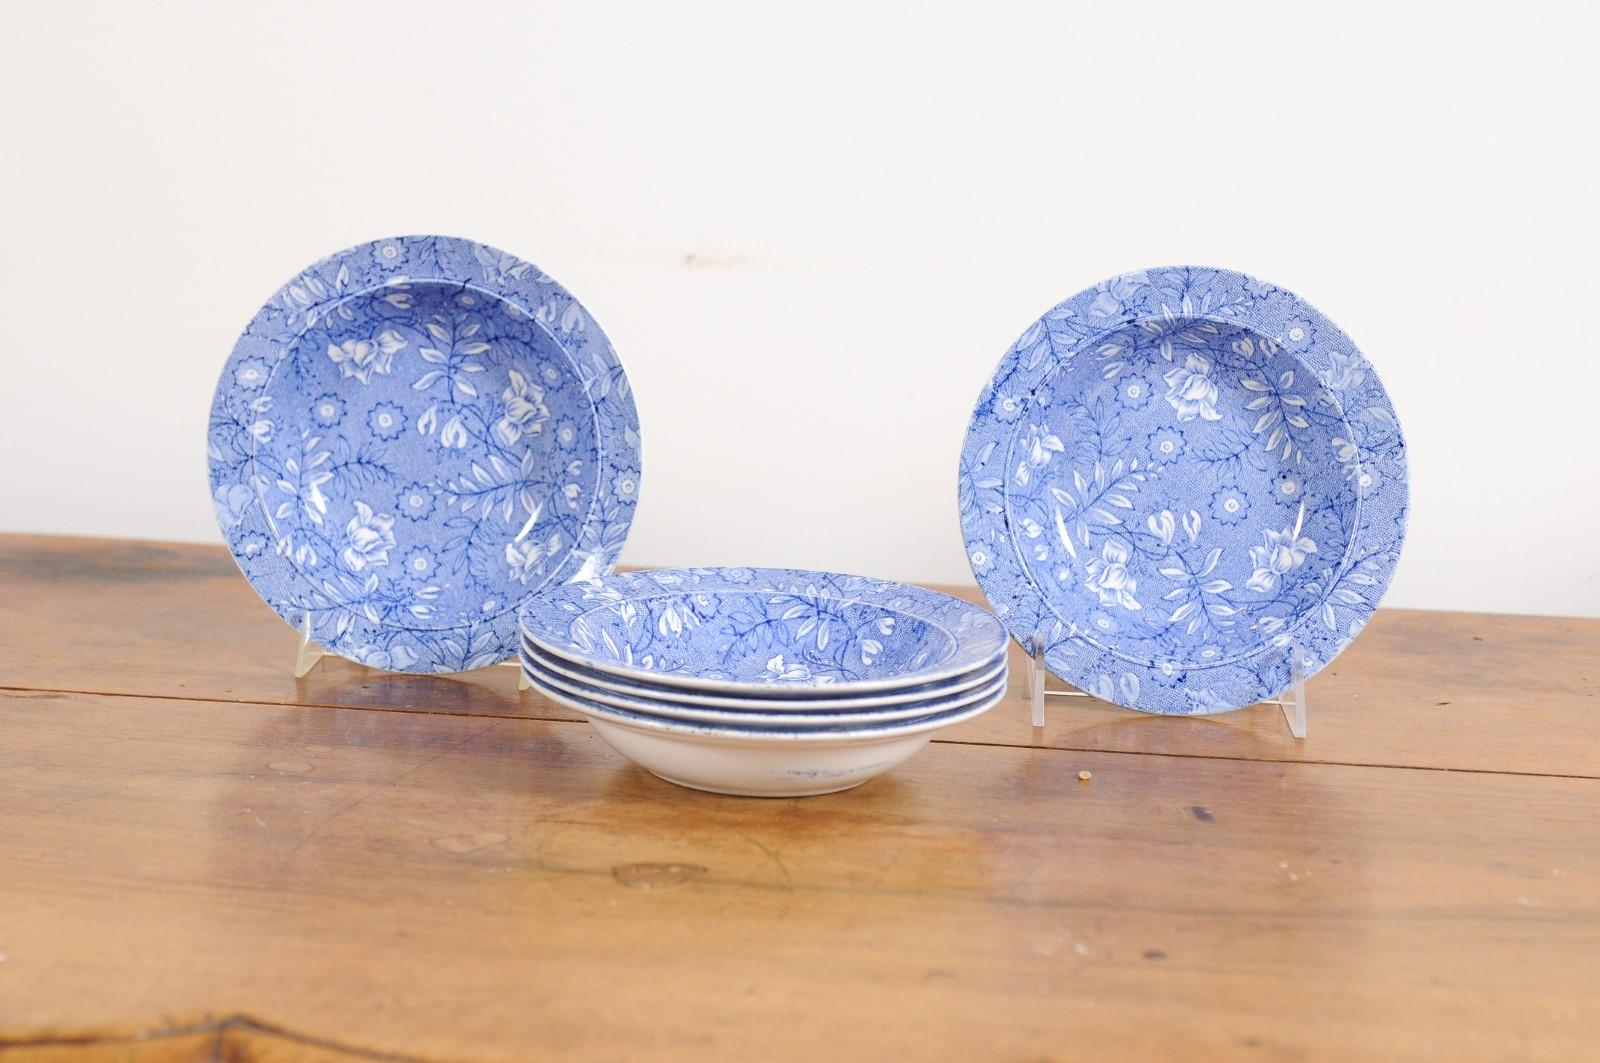 Six Royal Tudor Ware 1890s Blue and White Porcelain Bowls with Floral Pattern 3